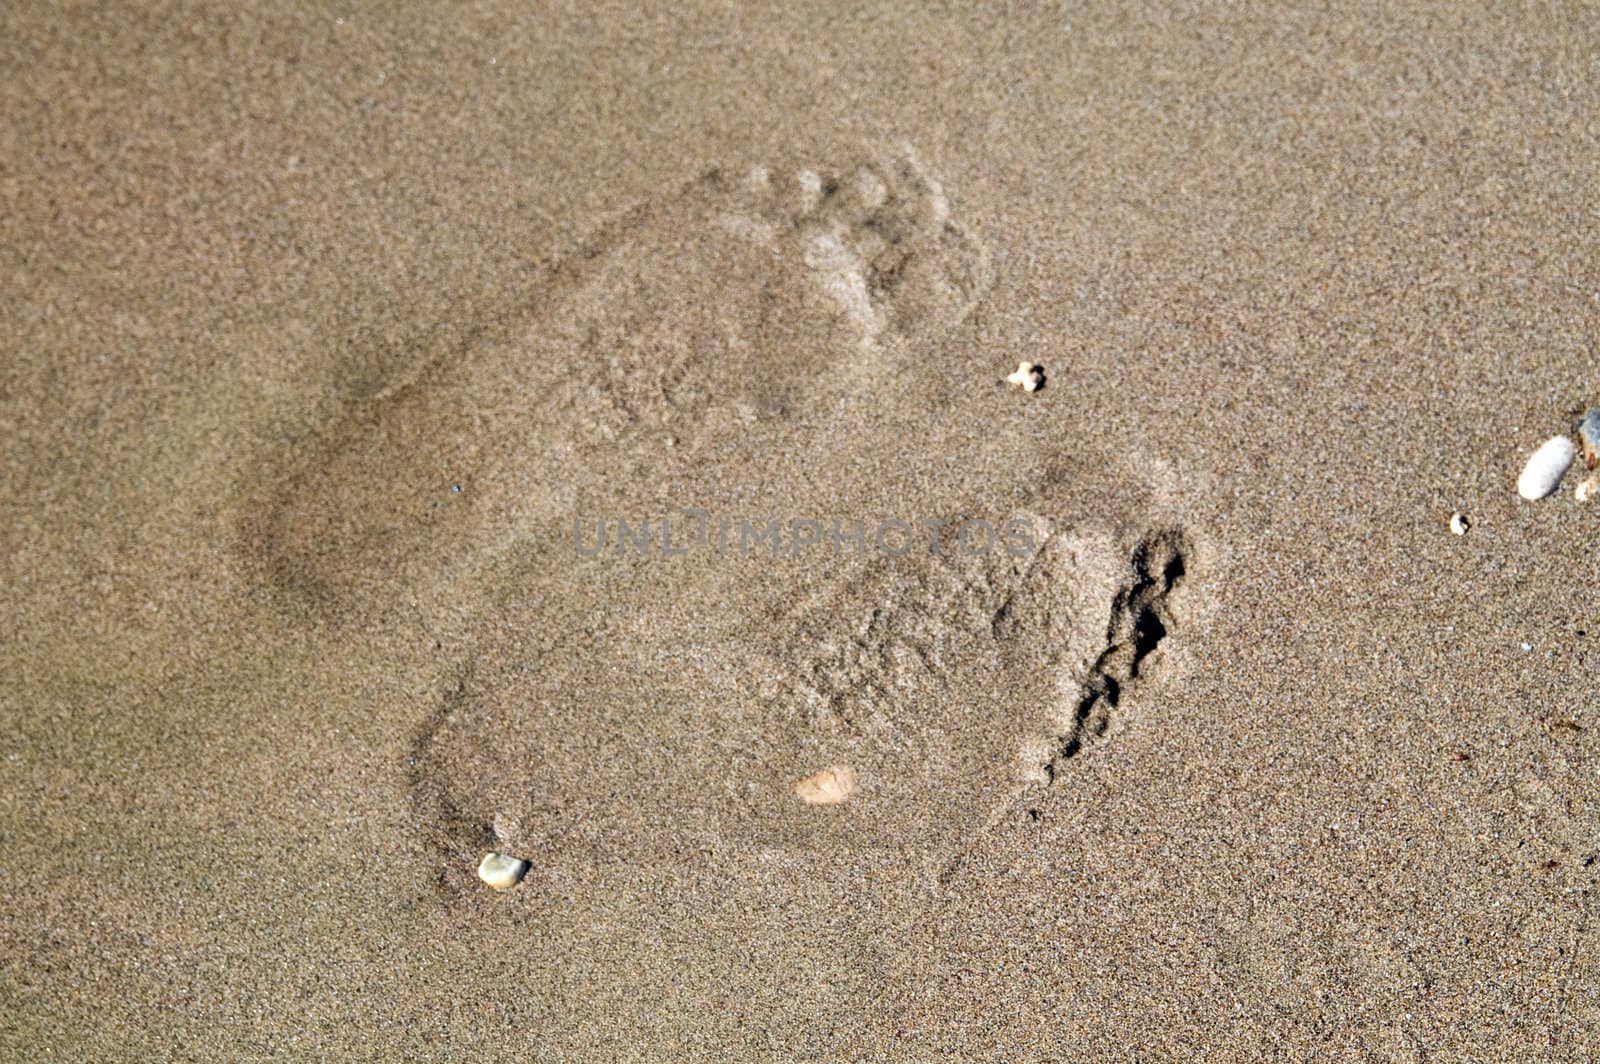 Two footprints on wet sand by lilsla